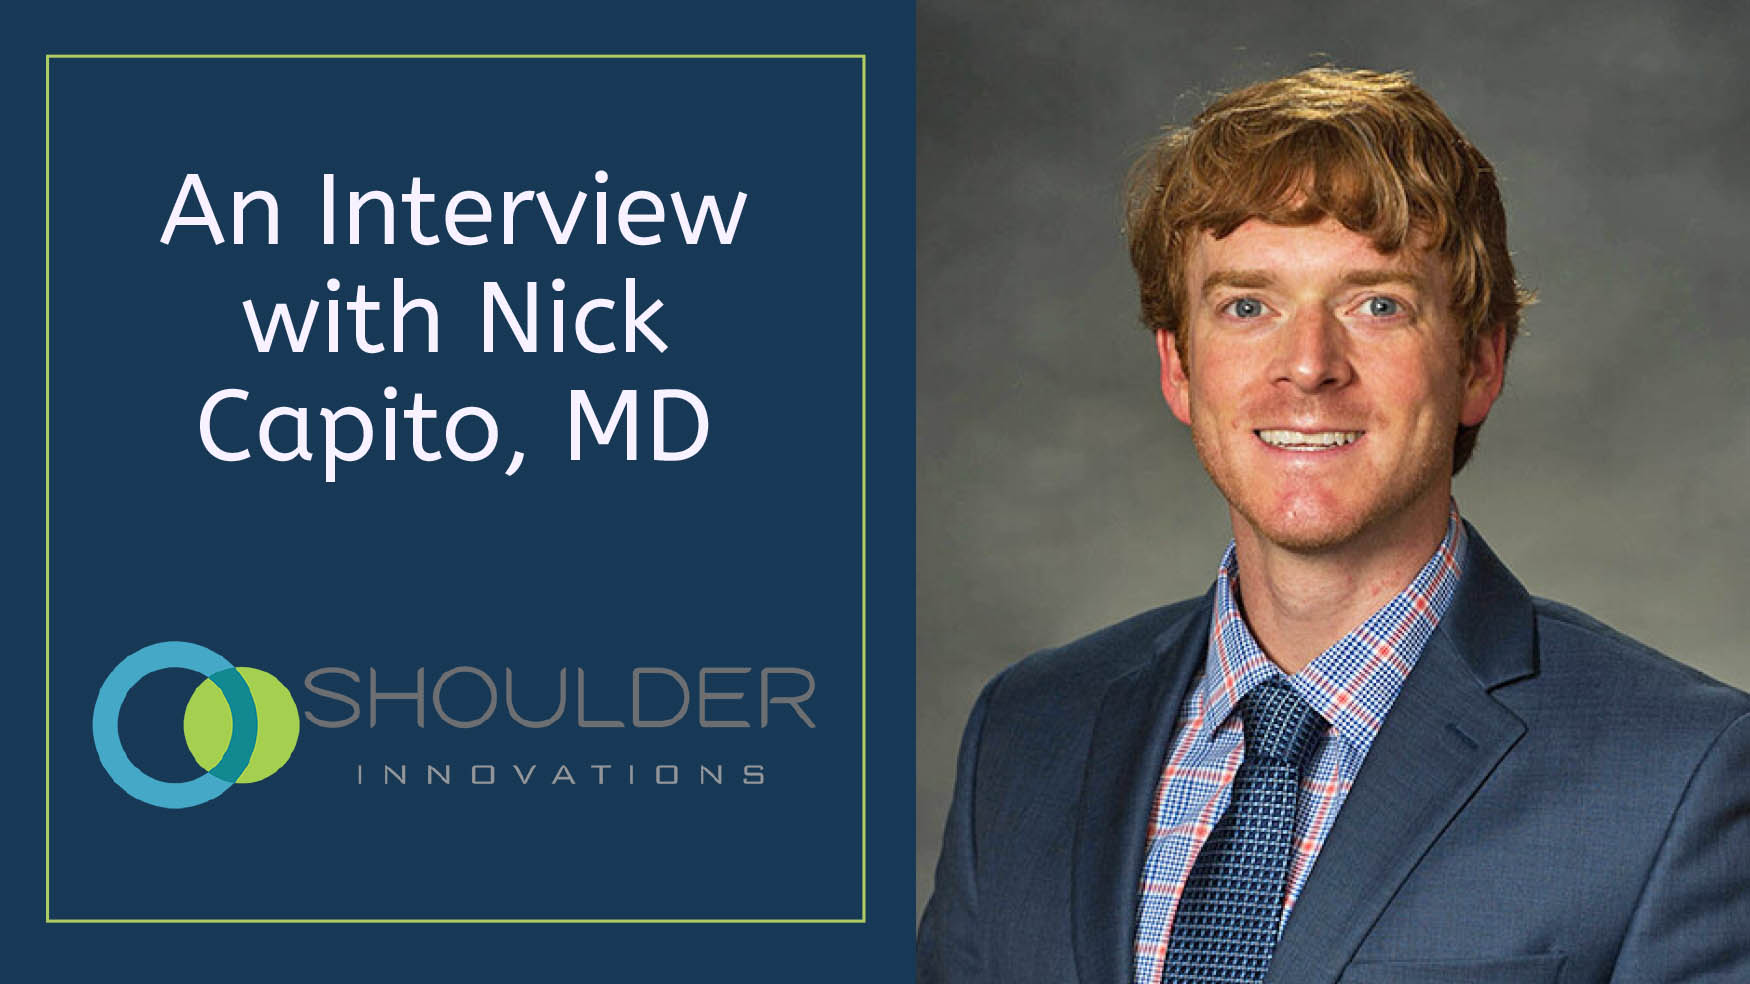 An Interview with Dr. Nick Capito